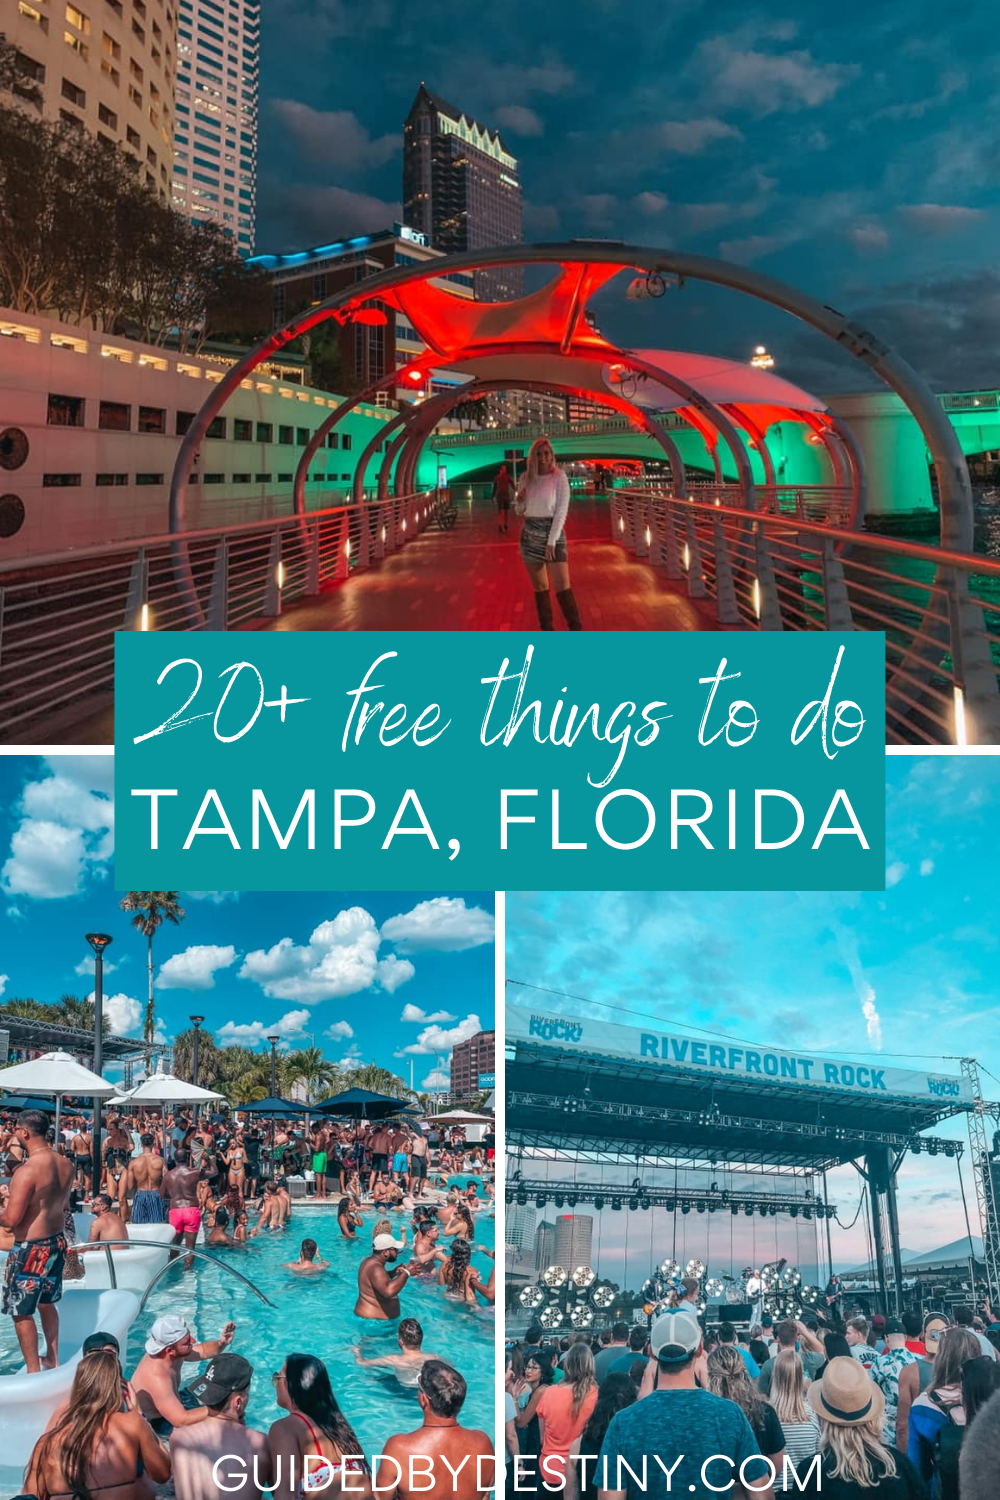 20+ free things to do in Tampa, Florida